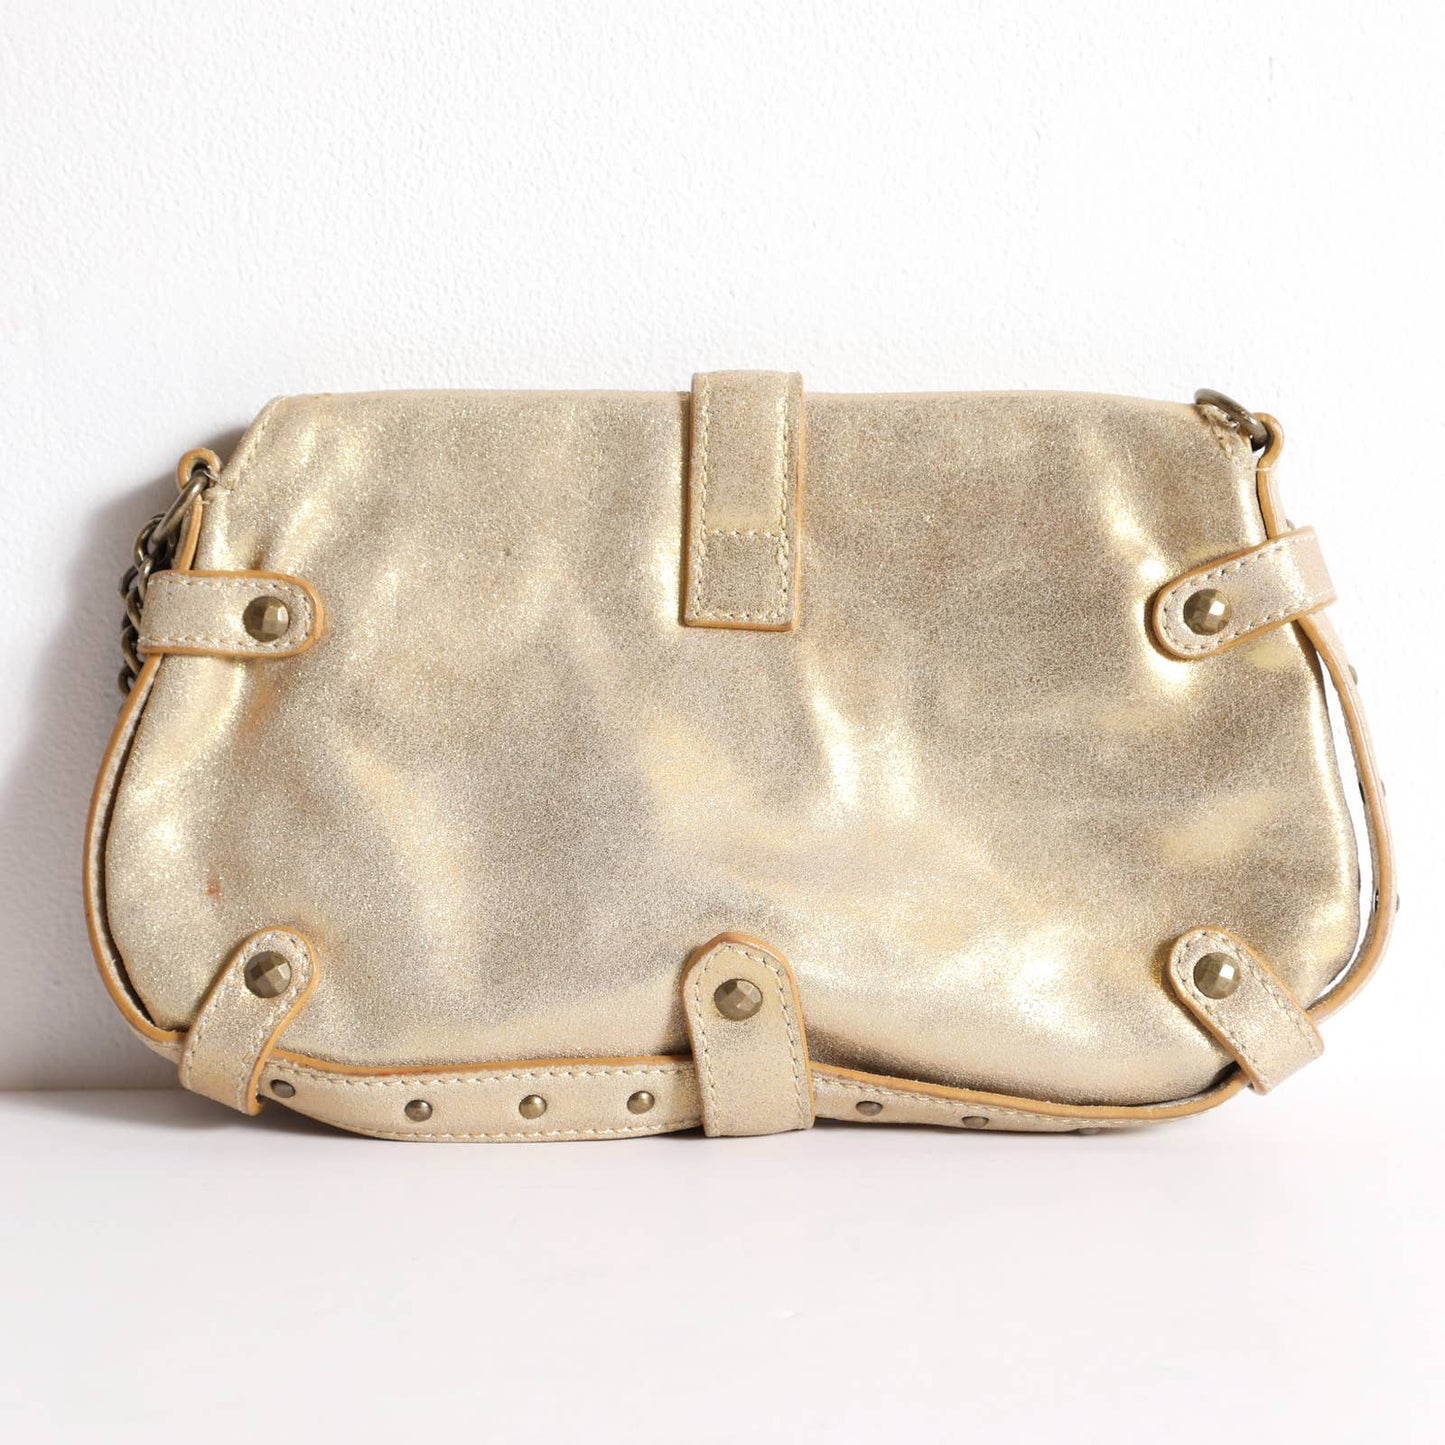 JUST CAVALLI Gold Metallic Leather Hand Bag with Chain Strap